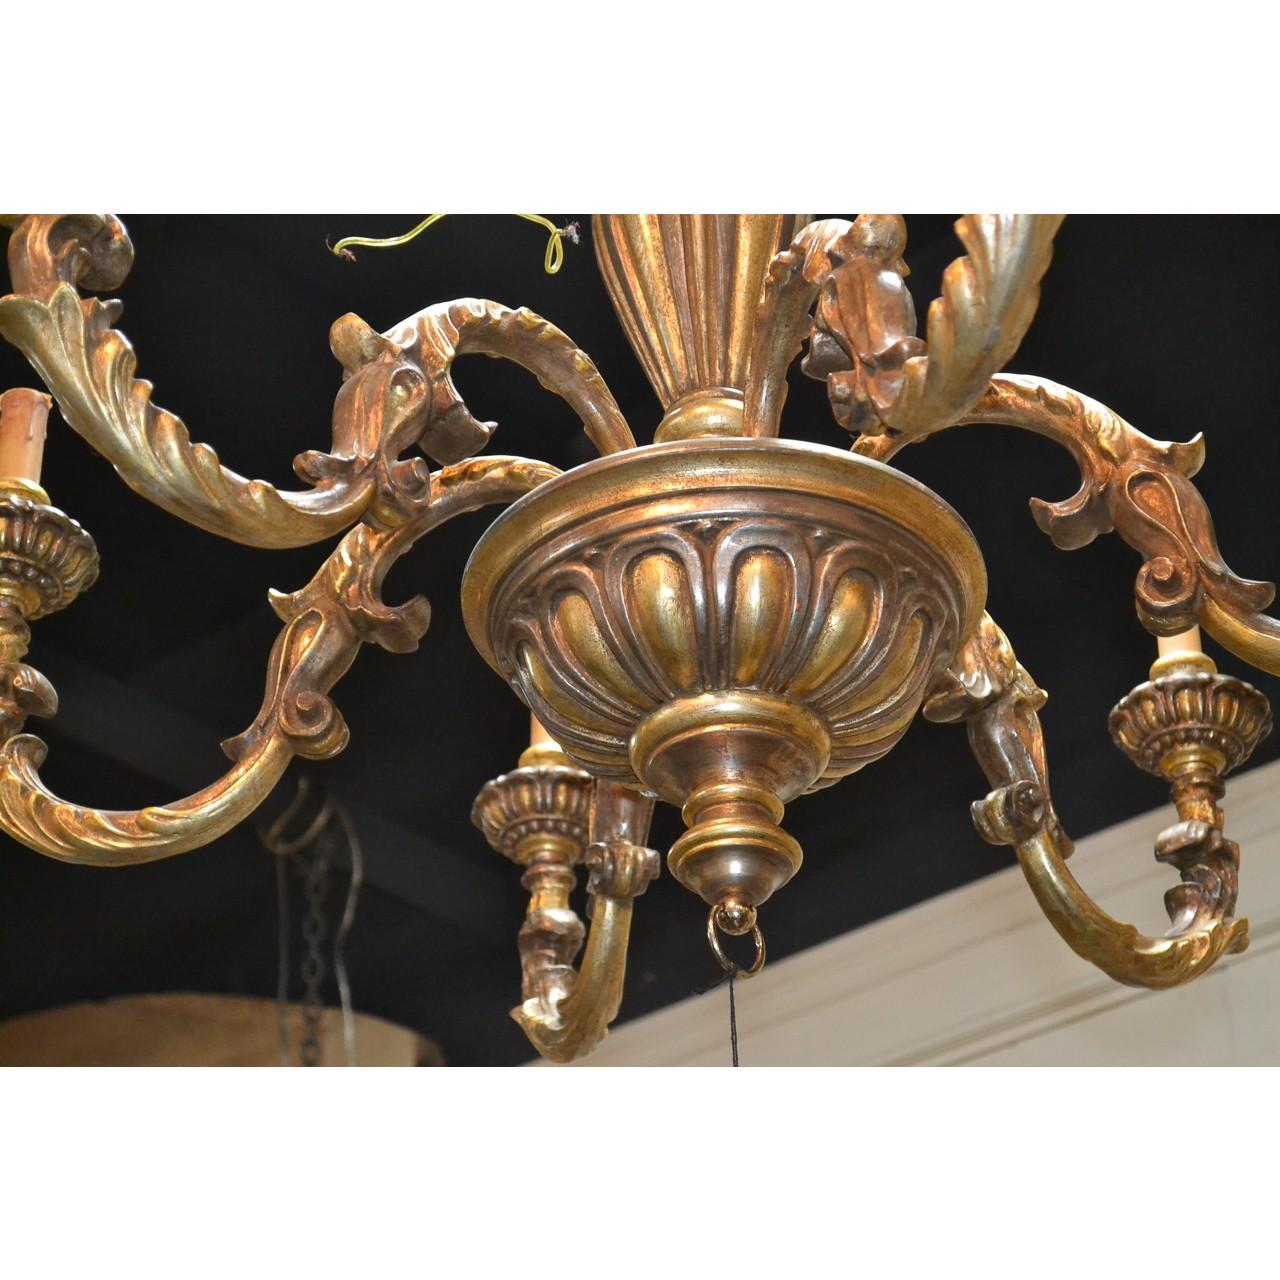 Excellent quality midcentury Continental carved two-tone gold-gilded chandelier with a finely carved and tapered stem atop a bowl-shaped mid-section with six acanthus motif scrolled arms having delicately scalloped candle cups,

circa 1940.